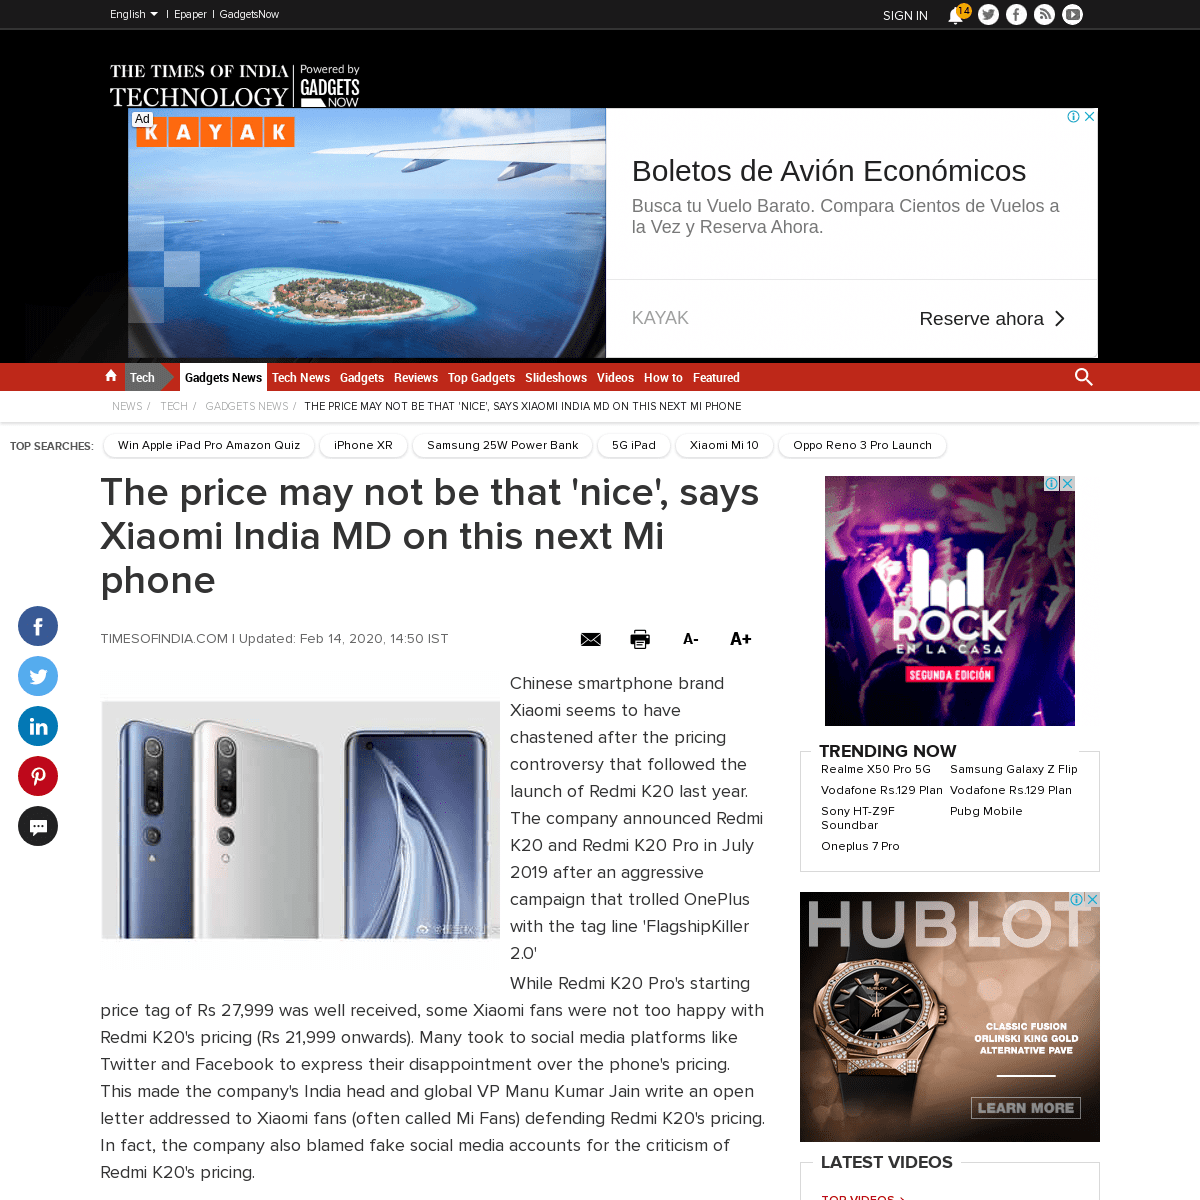 A complete backup of timesofindia.indiatimes.com/gadgets-news/the-price-may-not-be-that-nice-says-xiaomi-india-md-on-this-next-m